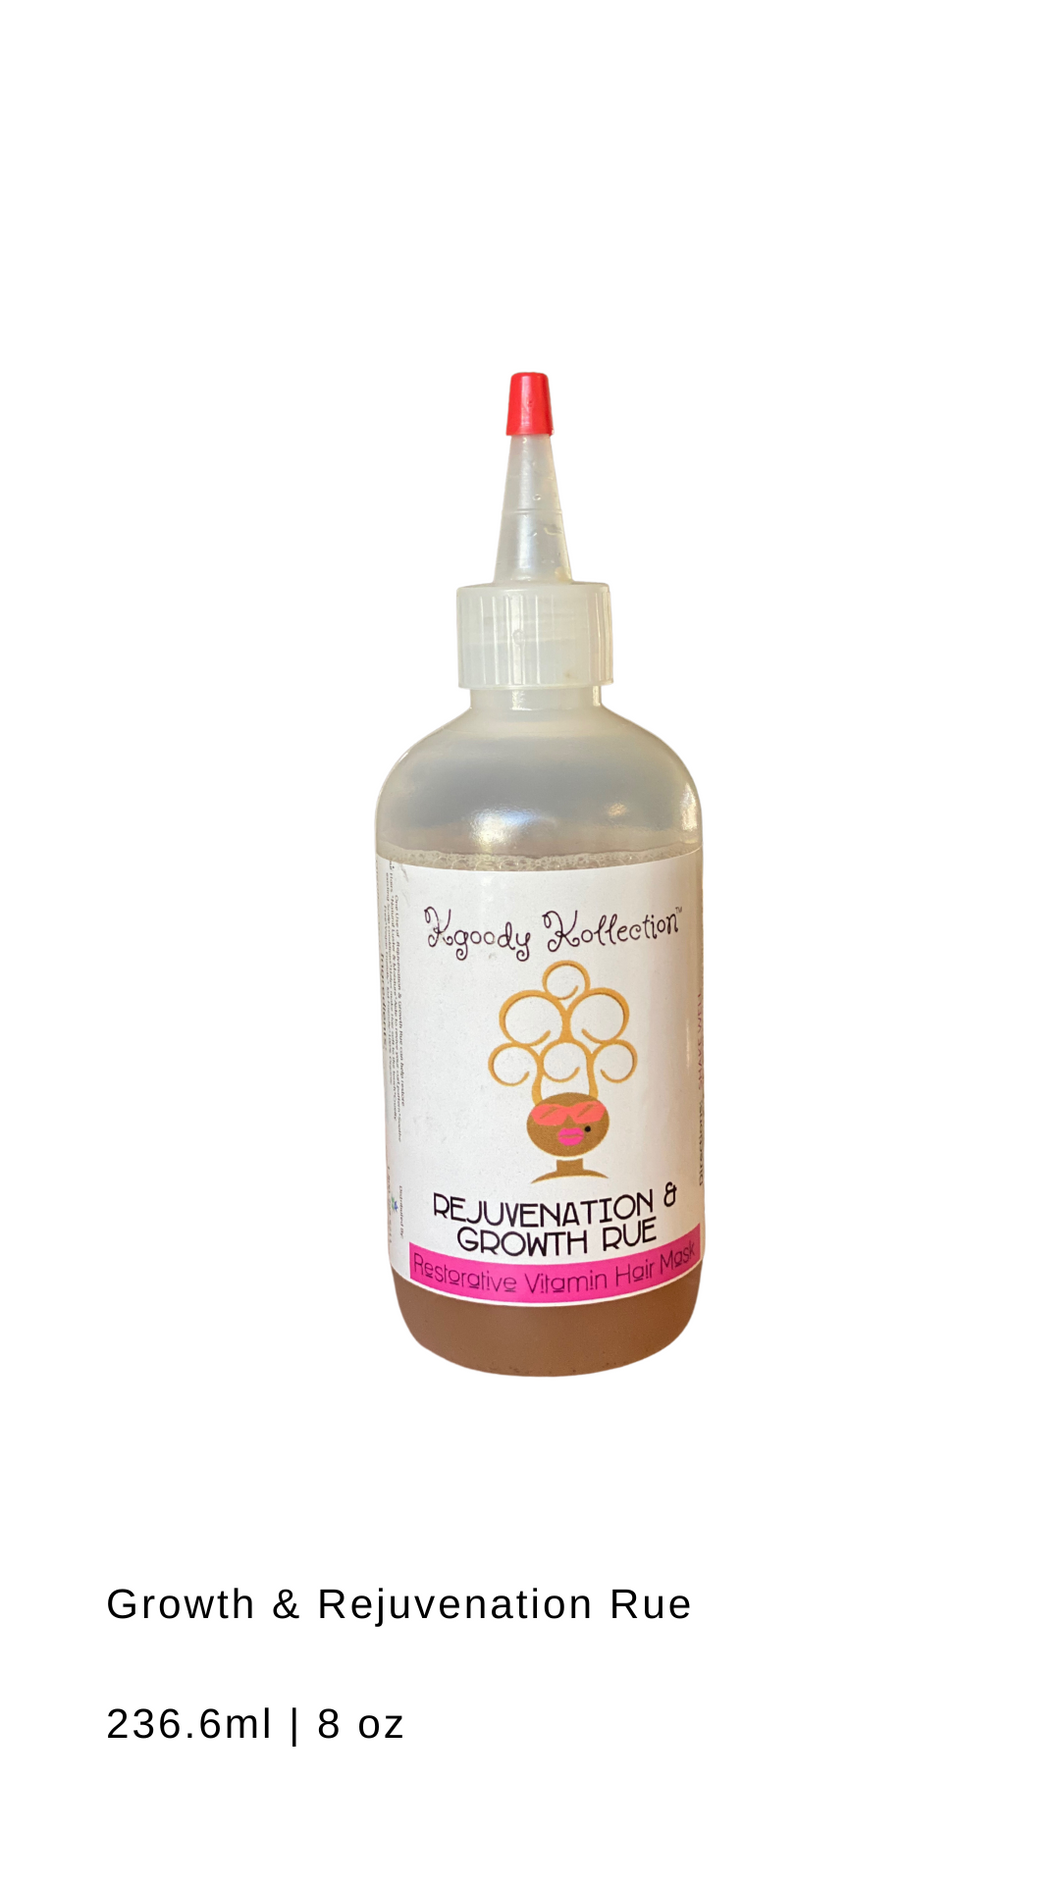 Kgoody Kollection™ Rejuvenation & Growth Rue